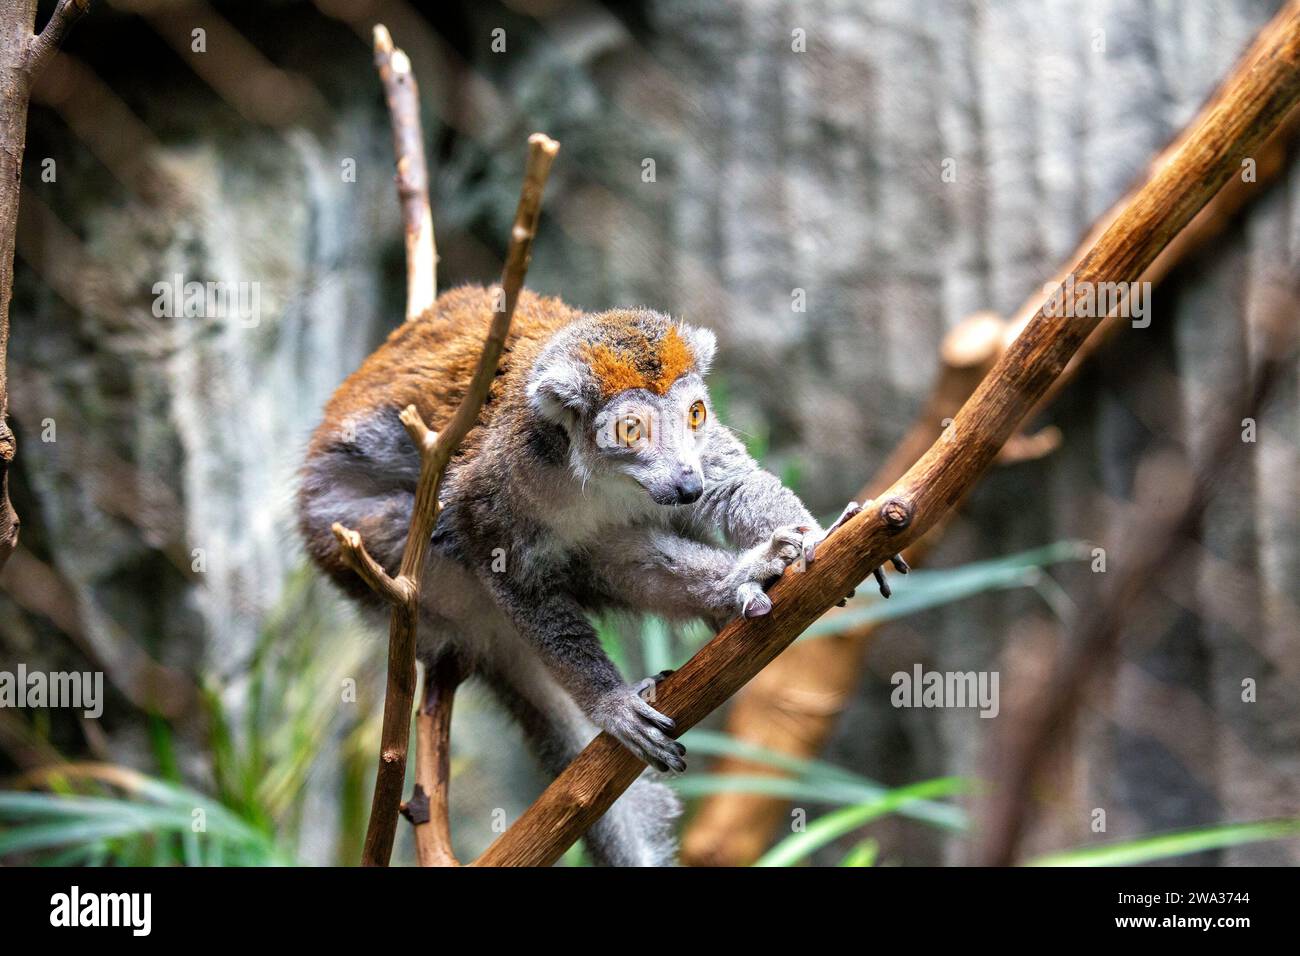 Eulemur coronatus, the Crowned Lemur, graces Madagascar's forests with its regal presence. This arboreal primate, with its distinctive crown, adds a t Stock Photo